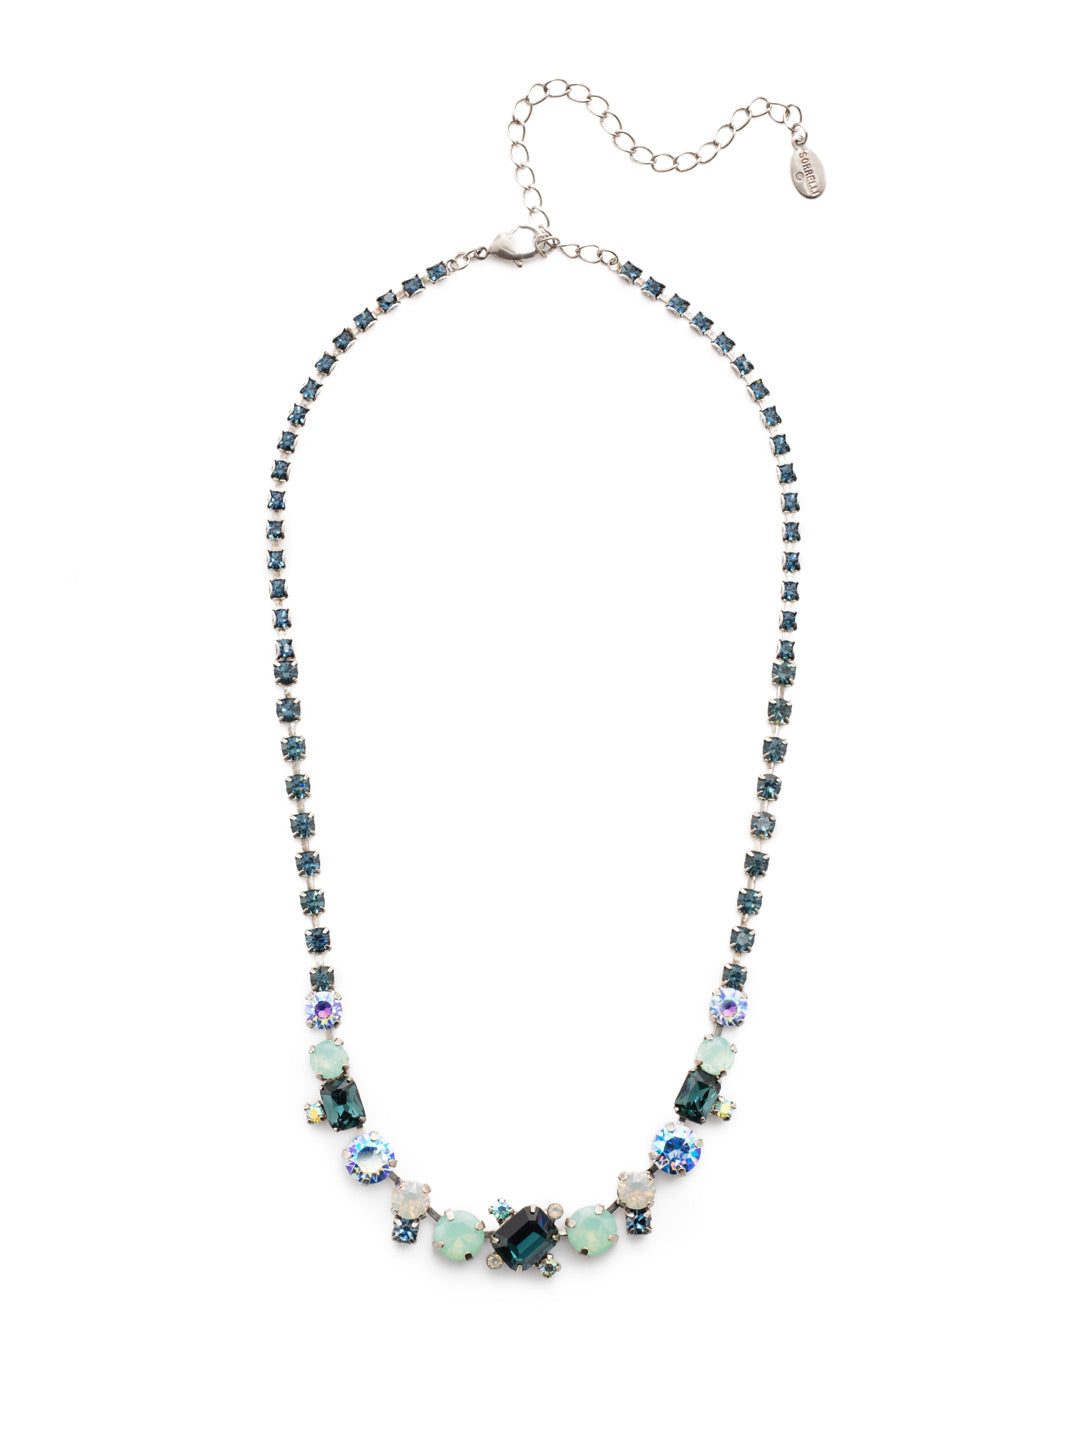 Tinsley Tennis Necklace - NEN17ASNFT - The Tinsley Statement Necklace exudes drama. Every inch is encrusted in sparkling crystals competing to be noticed. Fasten it on when you're looking for some attention. From Sorrelli's Night Frost collection in our Antique Silver-tone finish.